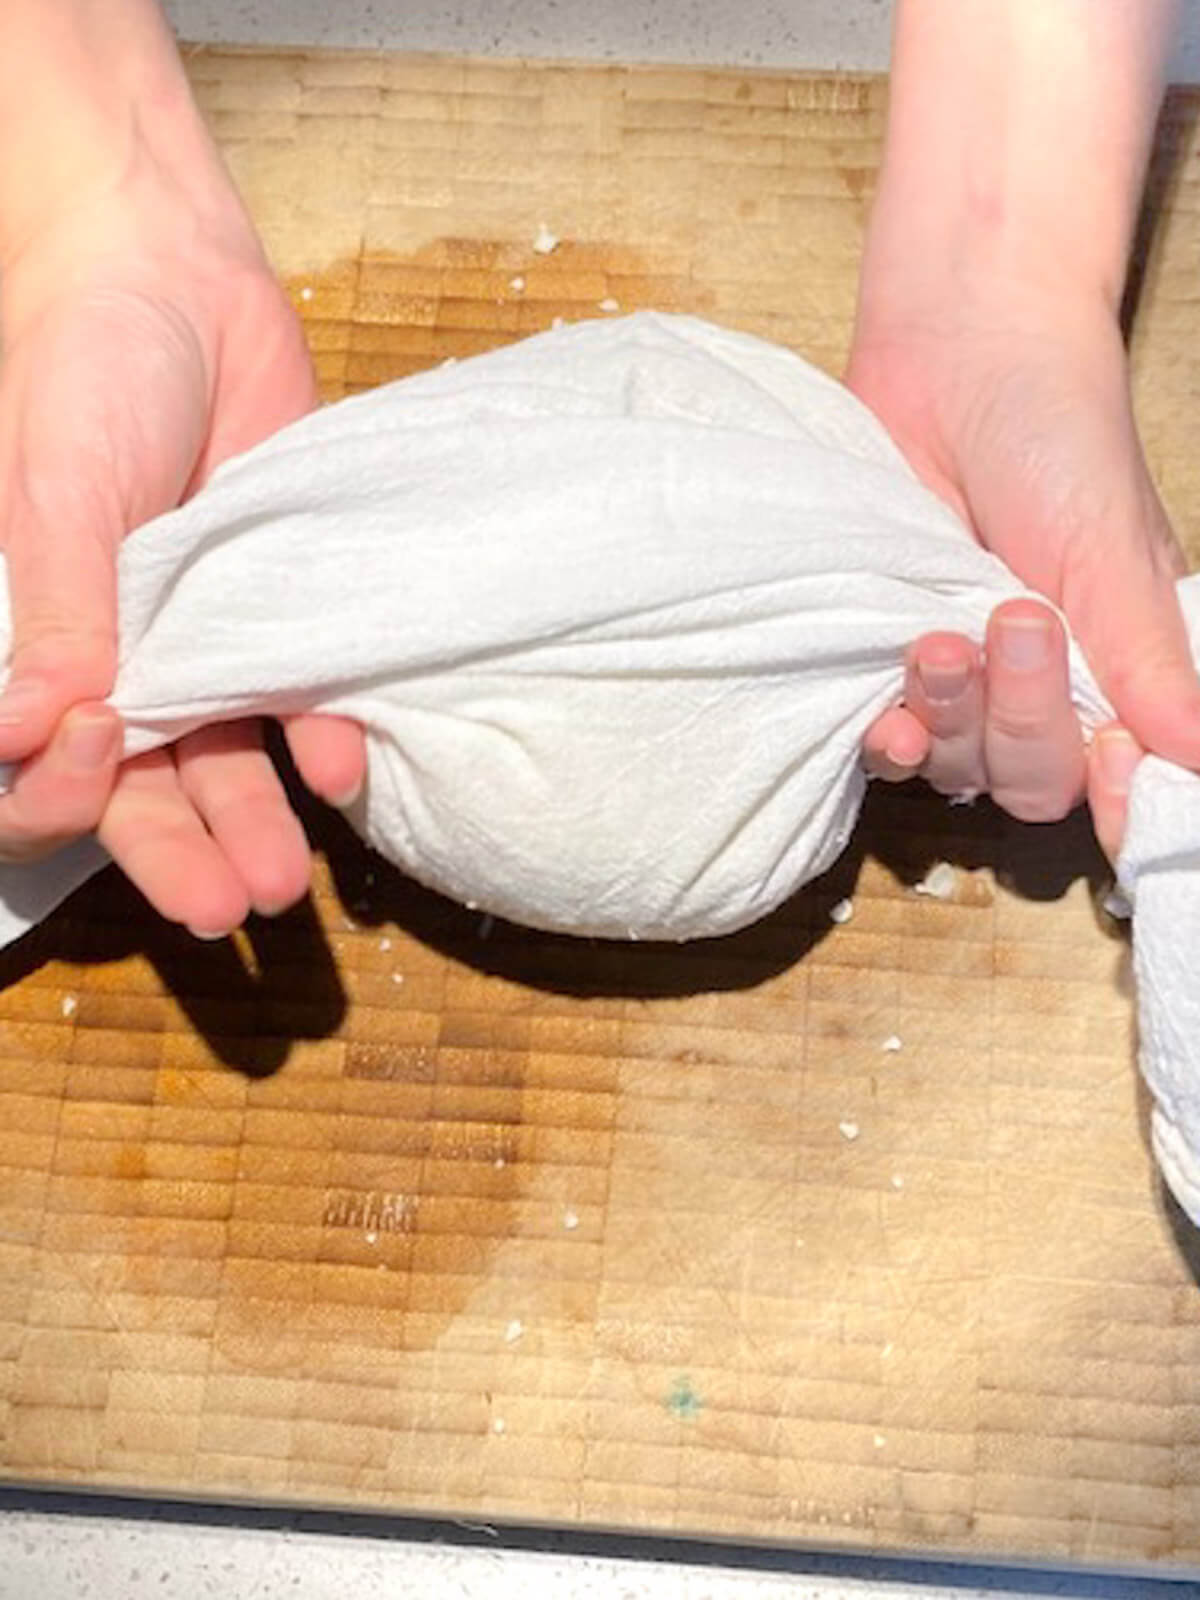 Wrapping cauliflower rice in flour sack towel